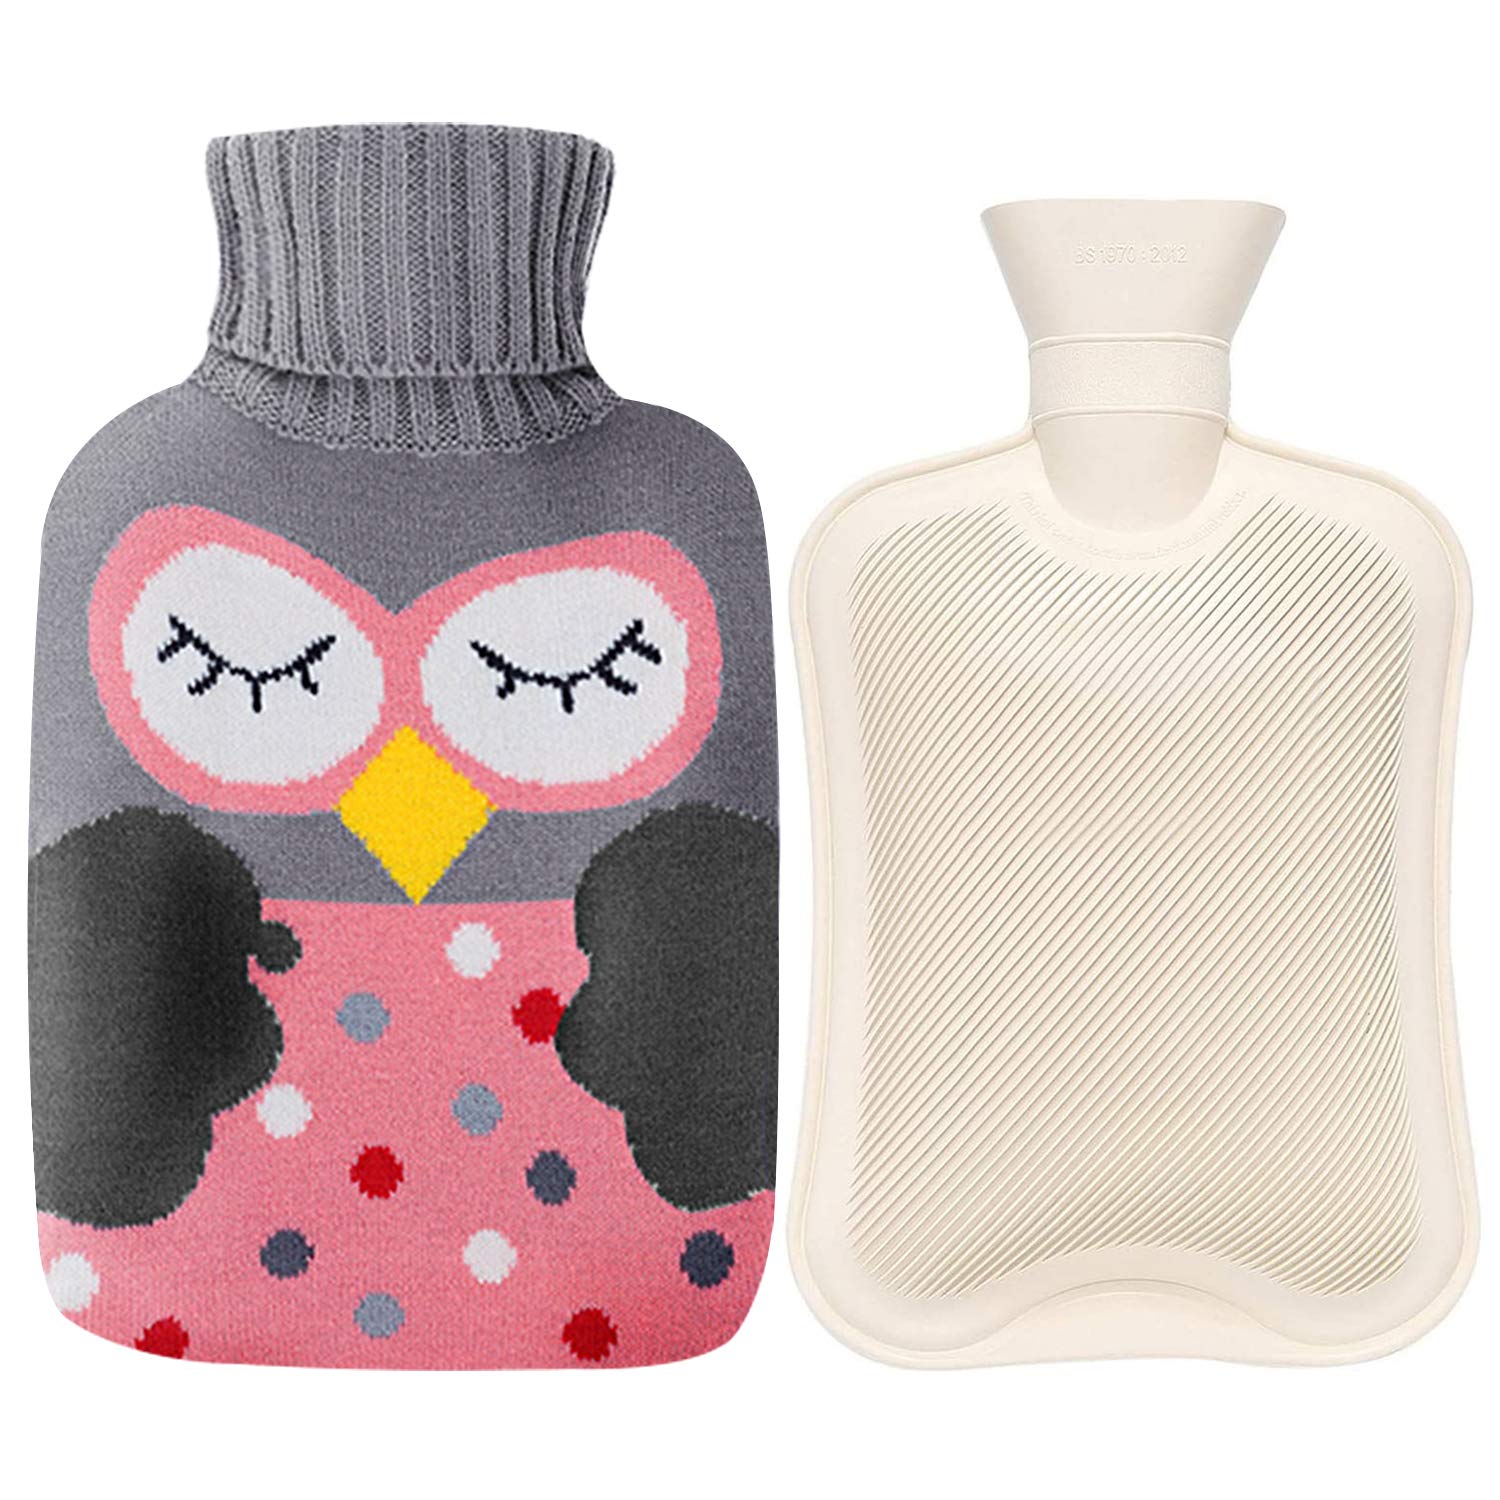 Happy Heat Hot Water Bottle Electric with Cover, Heating Pad, Warm Compress Bag for Menstrual/Period Cramps, Neck, Back, Shoulder Pain & More, Hot